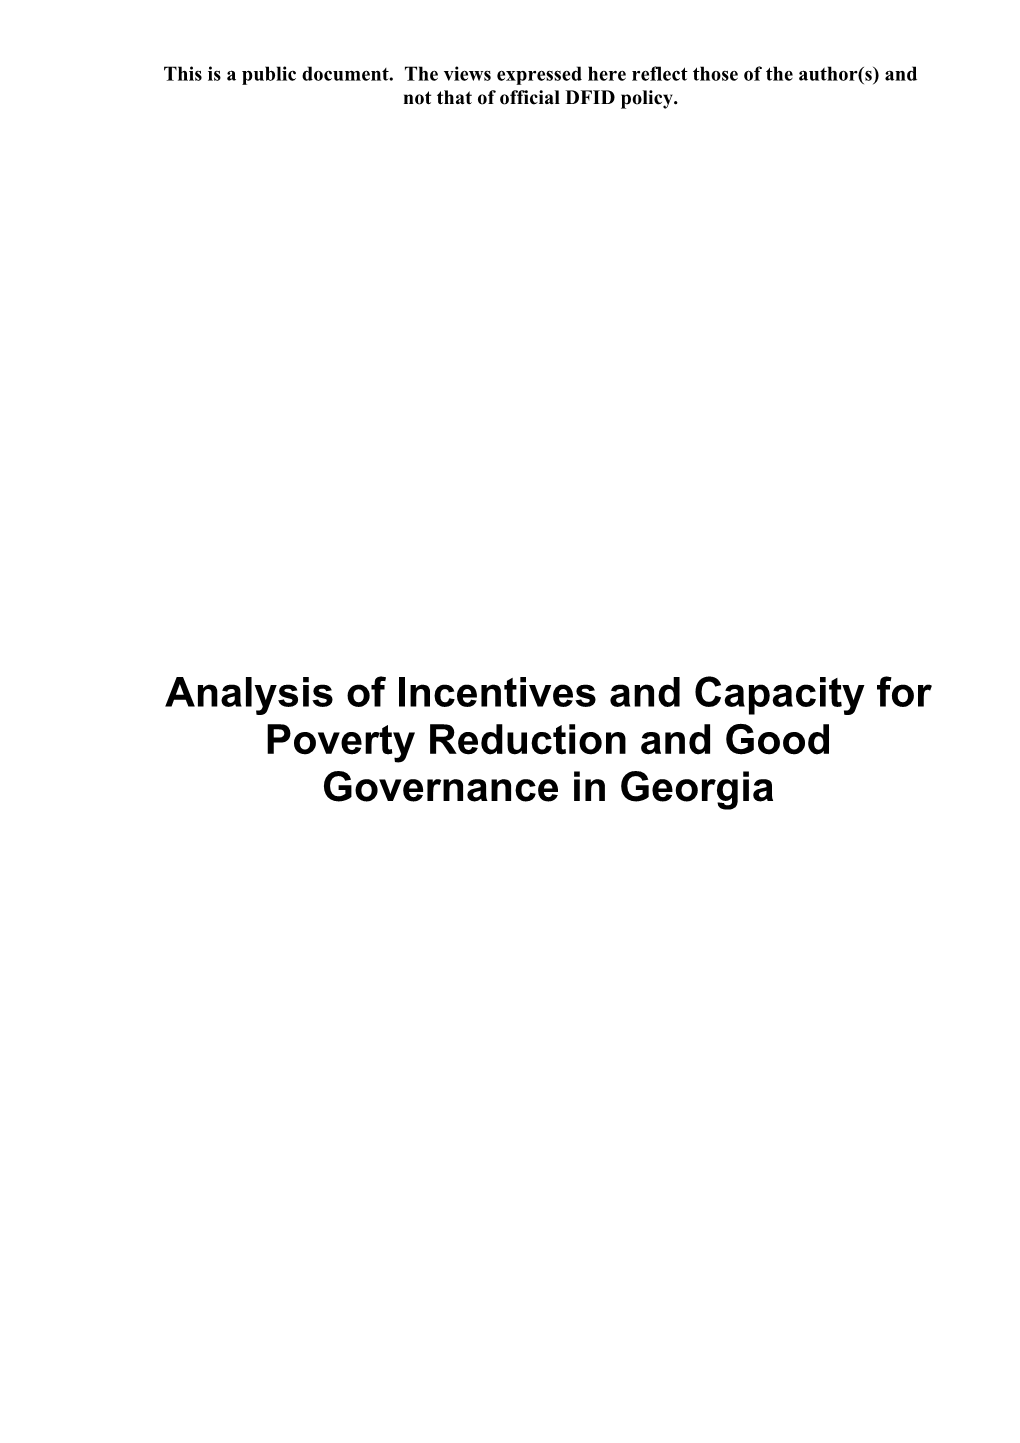 Analysis of Incentives and Capacity for Poverty Reduction and Good Governance in Georgia